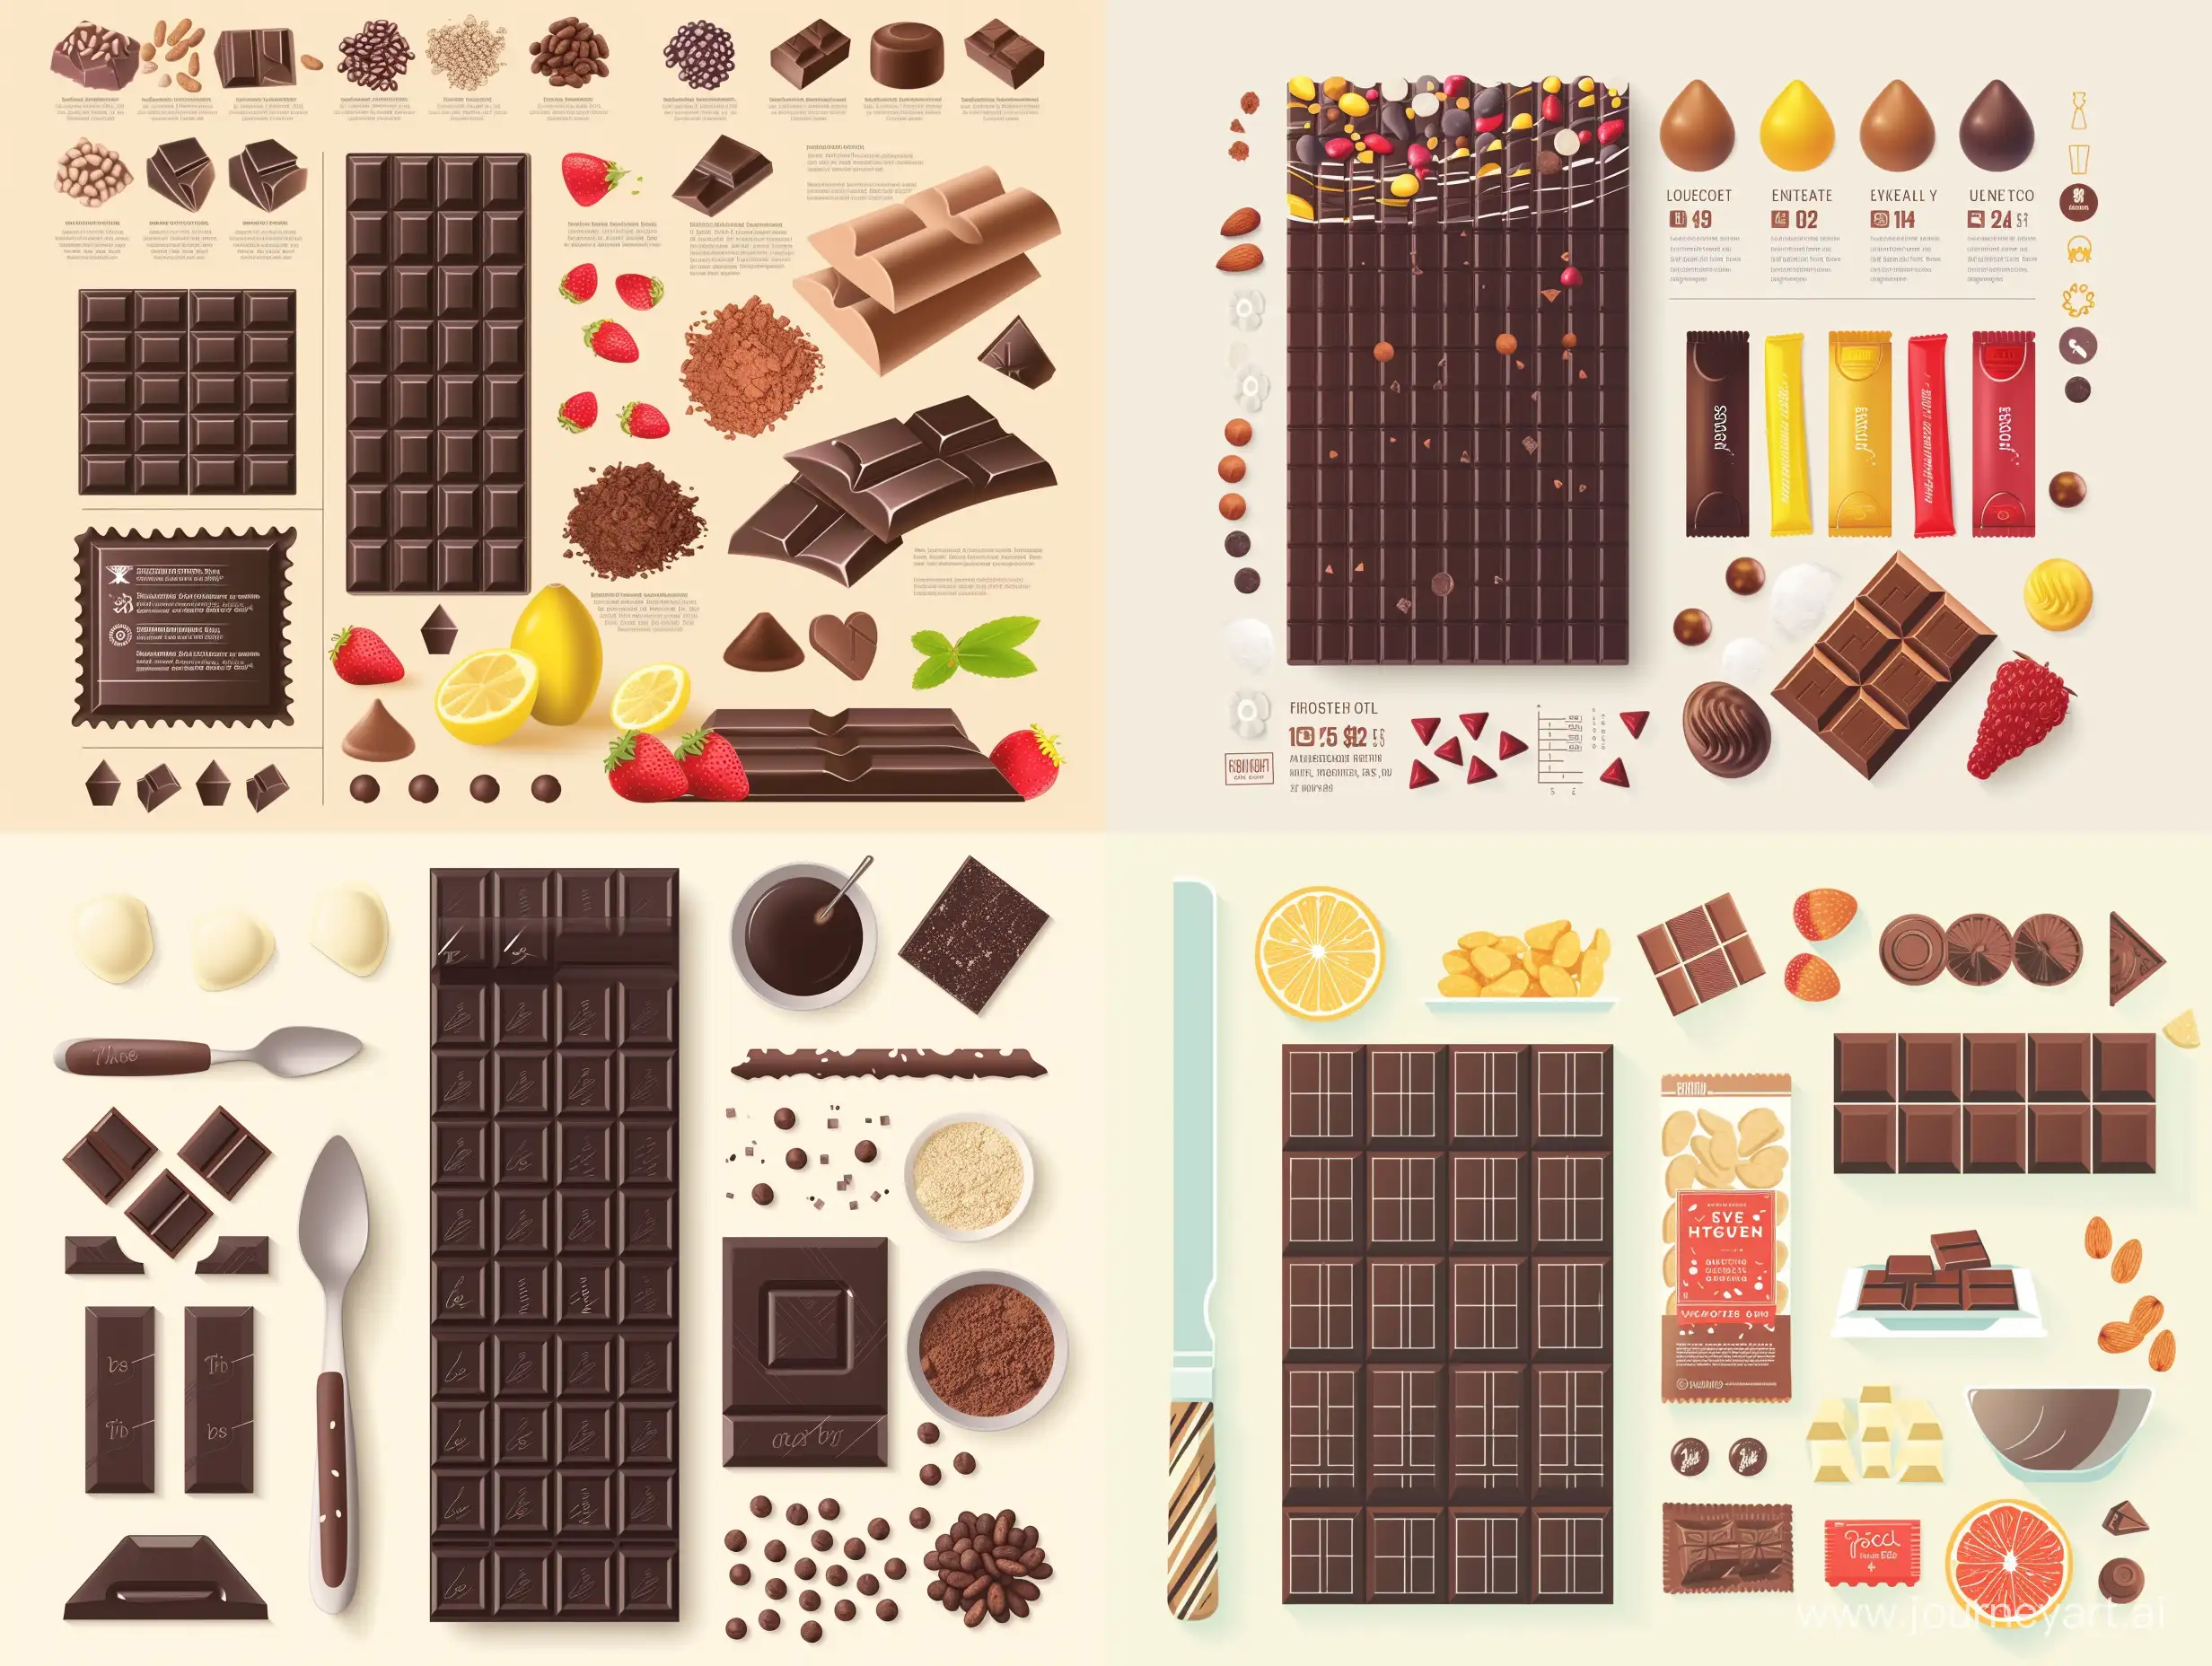 Delicious-Chocolate-Bar-Infographic-with-Tempting-Visuals